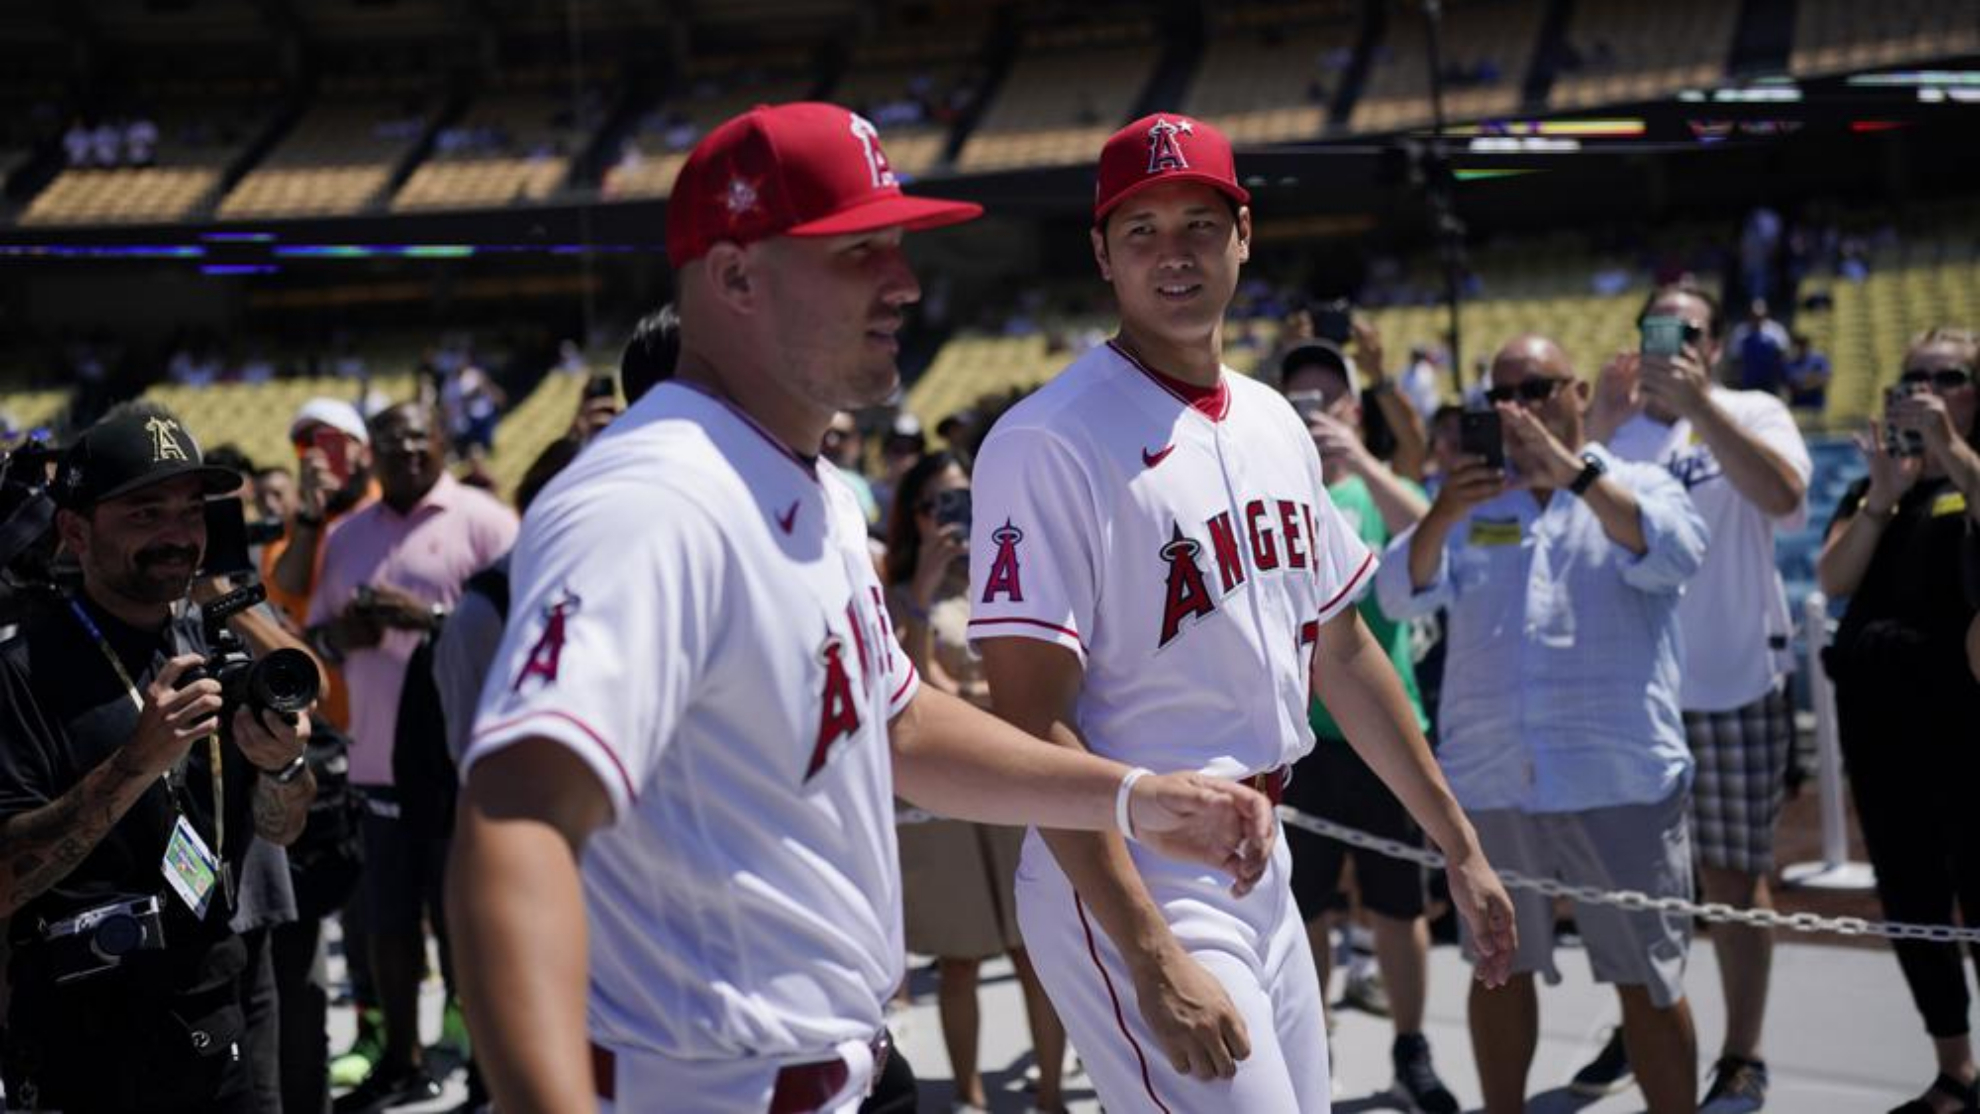 Are the Angels considering trading away the American League's current MVP Shohei Ohtani?